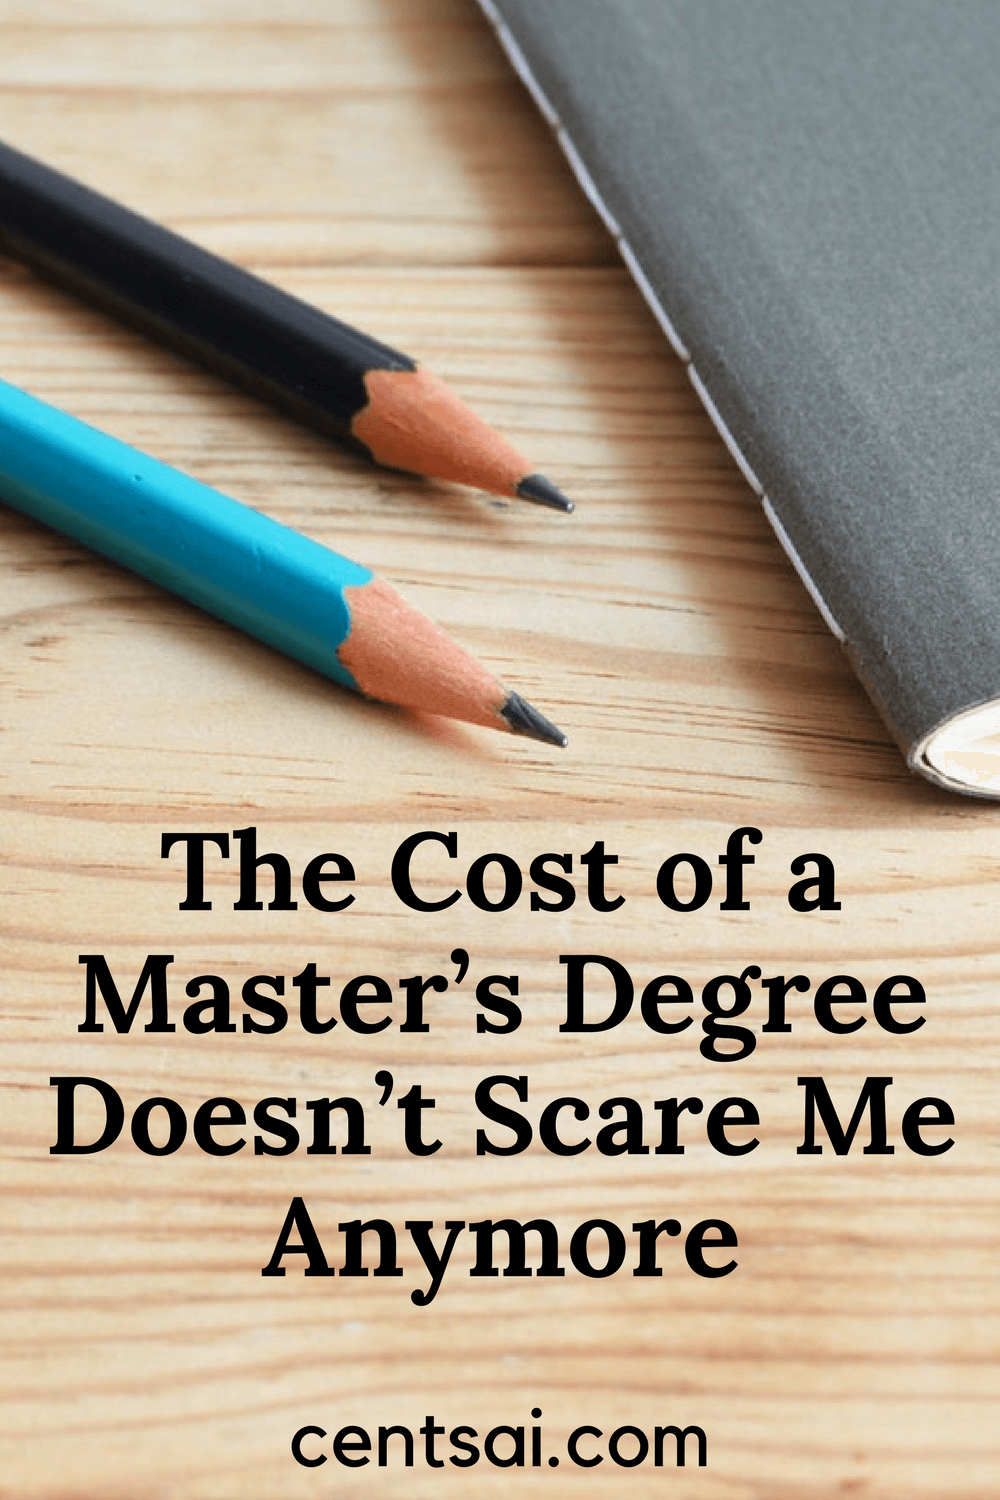 The Cost of a Master’s Degree Doesn’t Scare Me Anymore